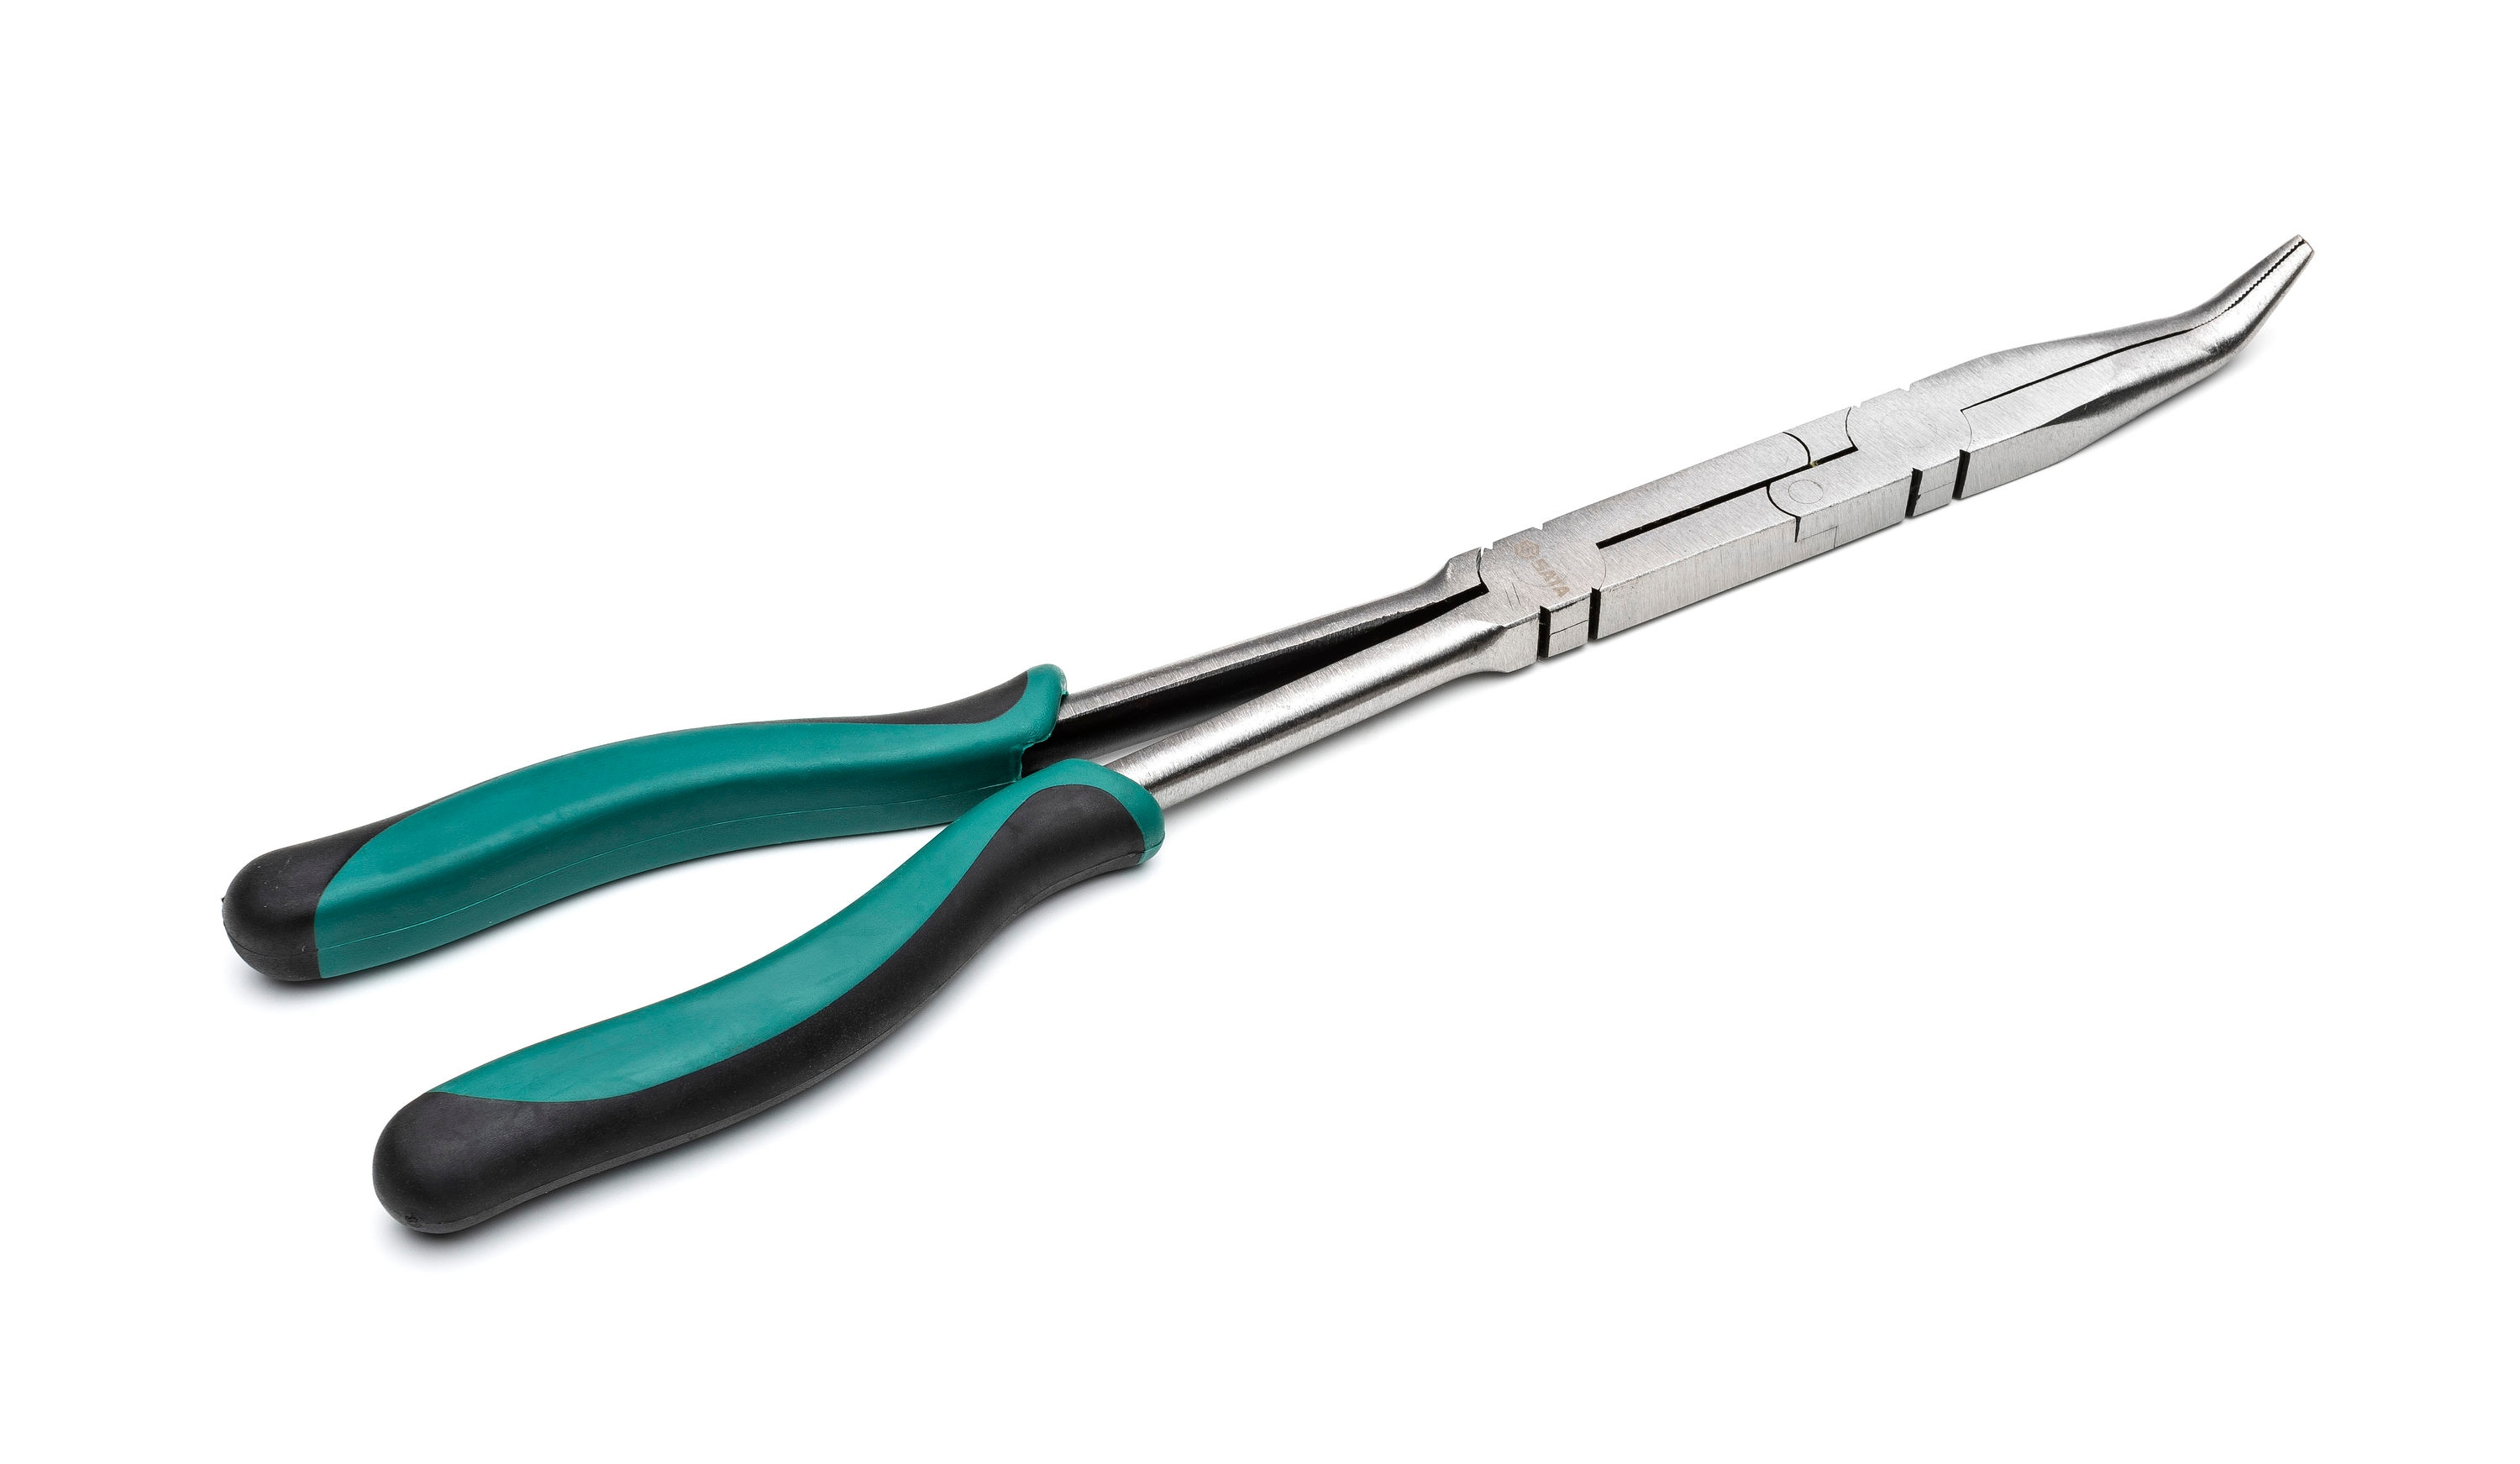 SATA Straight Body Double x-Pliers, with Green Handles & A Long-Nose Design for Access in Tight Spaces - ST70711, 45° Tip